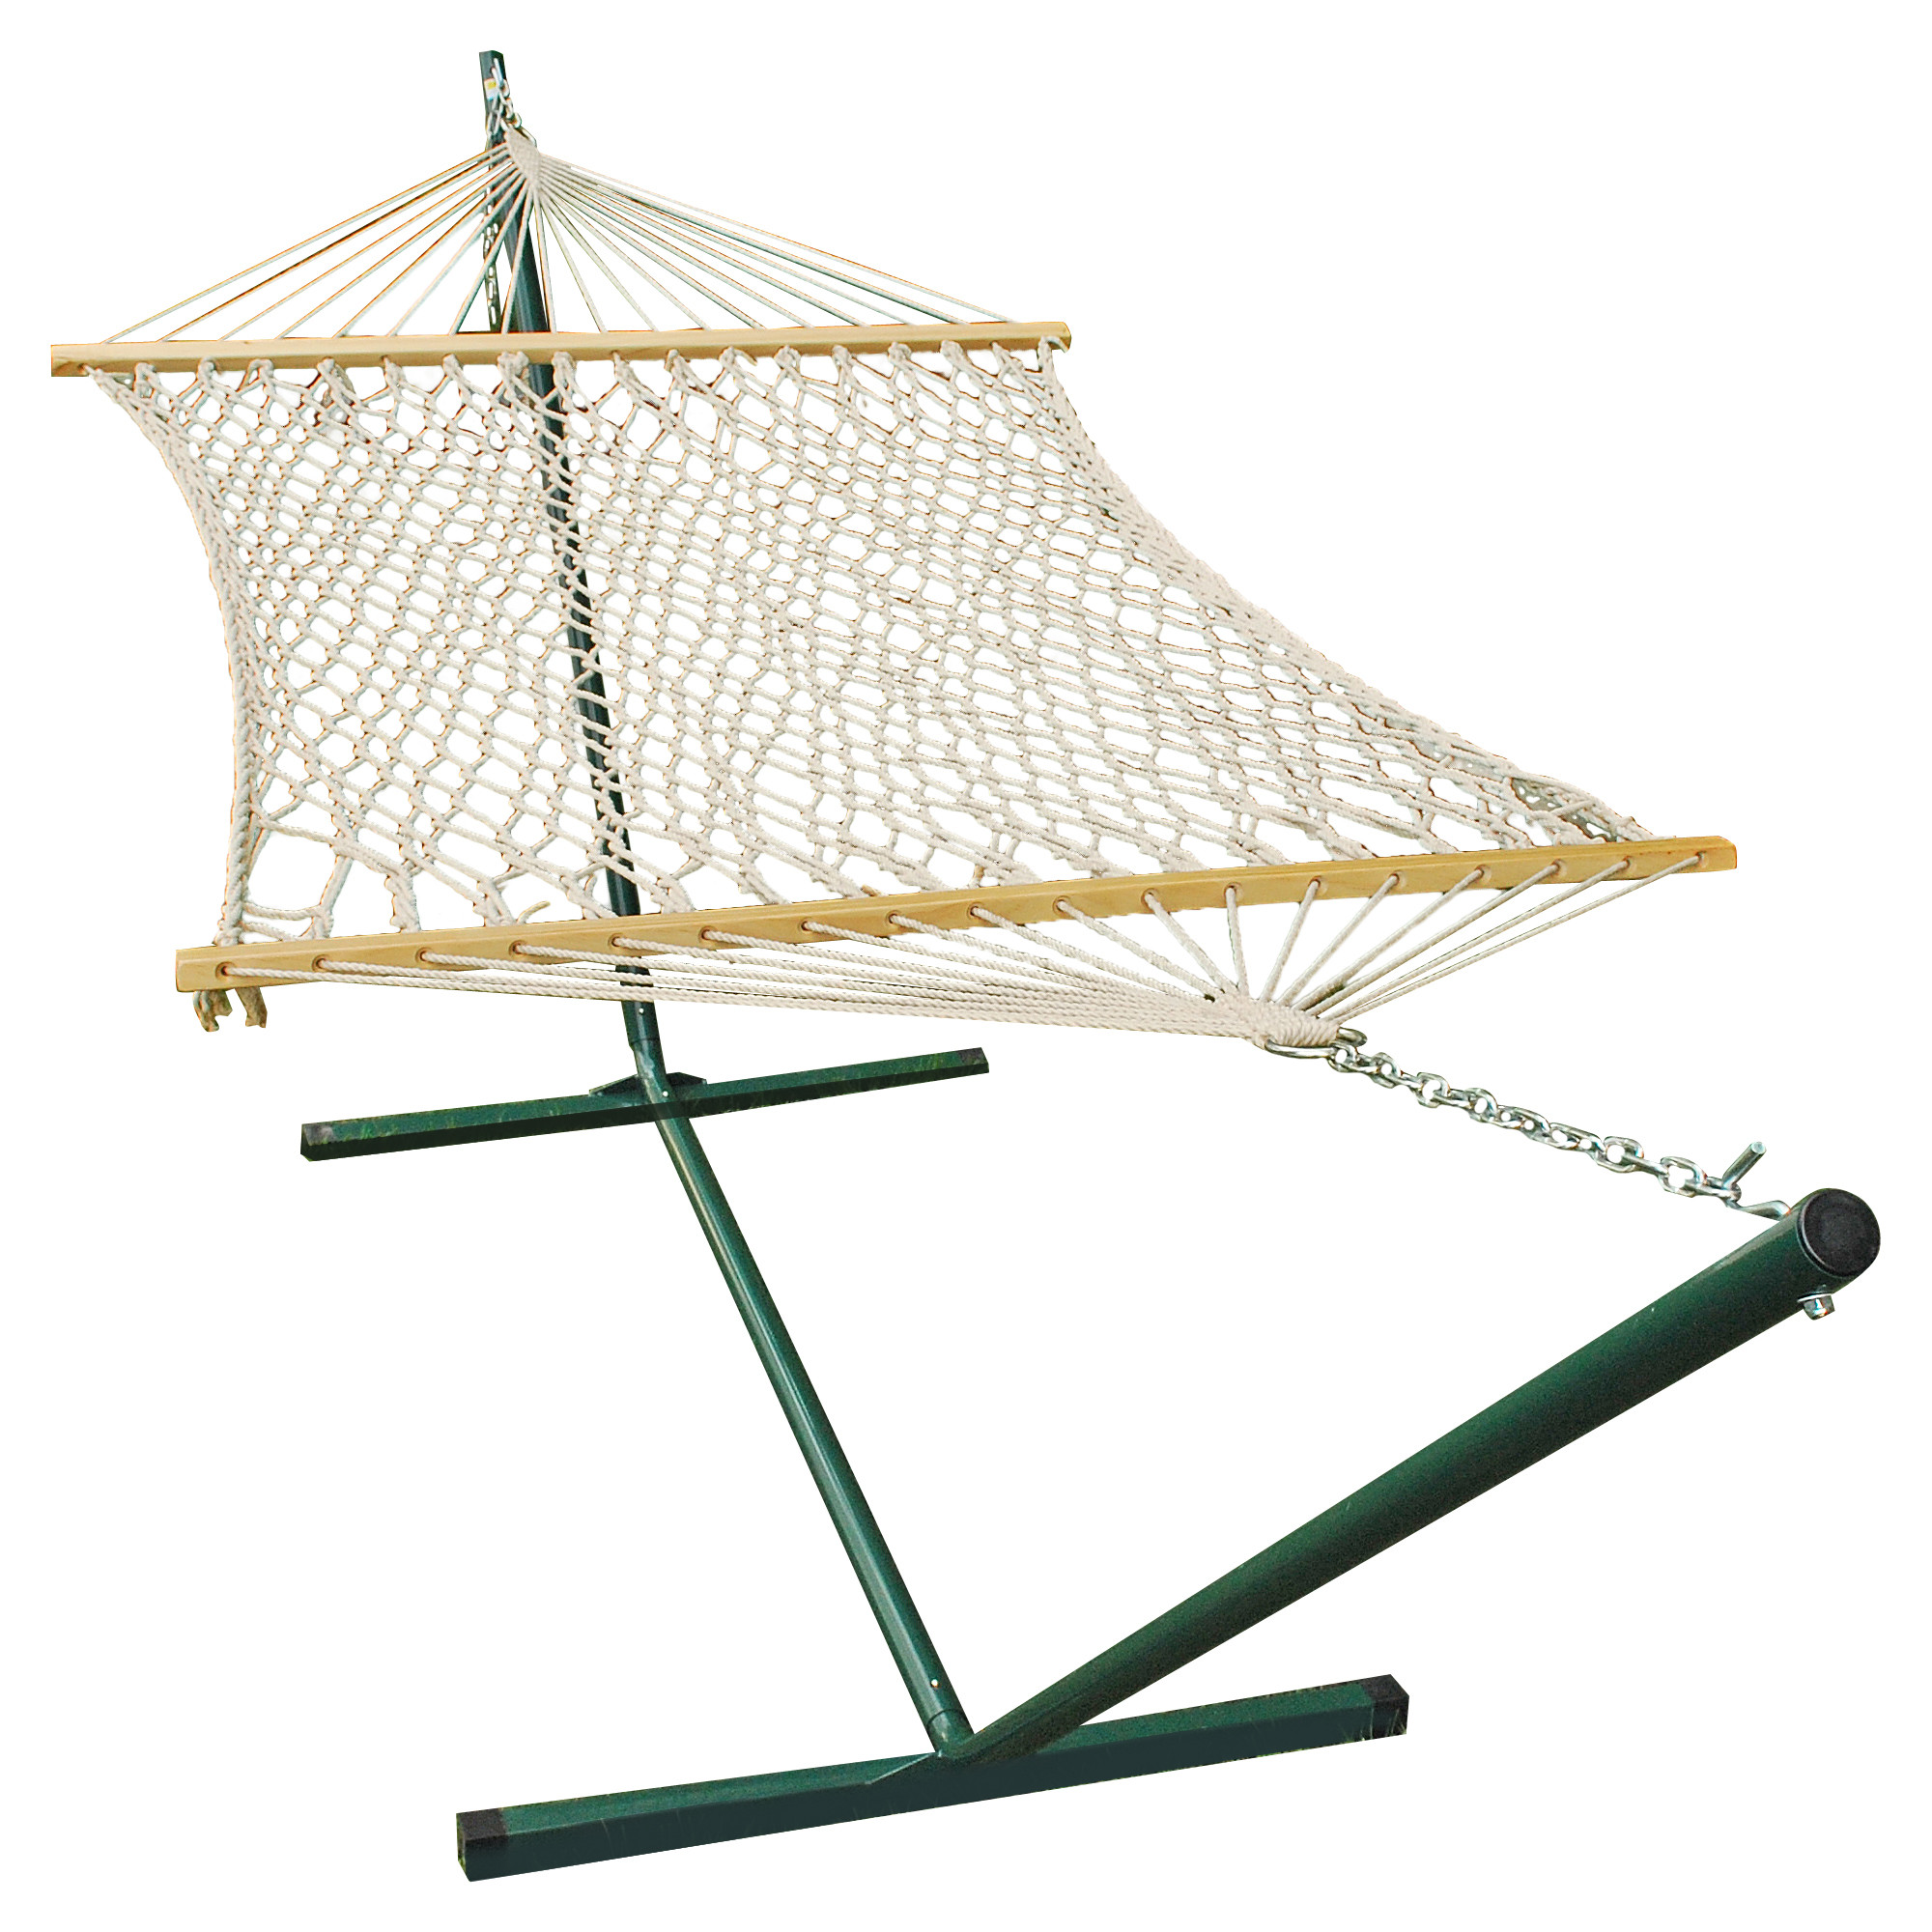 12' Cotton Rope Hammock and Stand Combination - Walmart.com